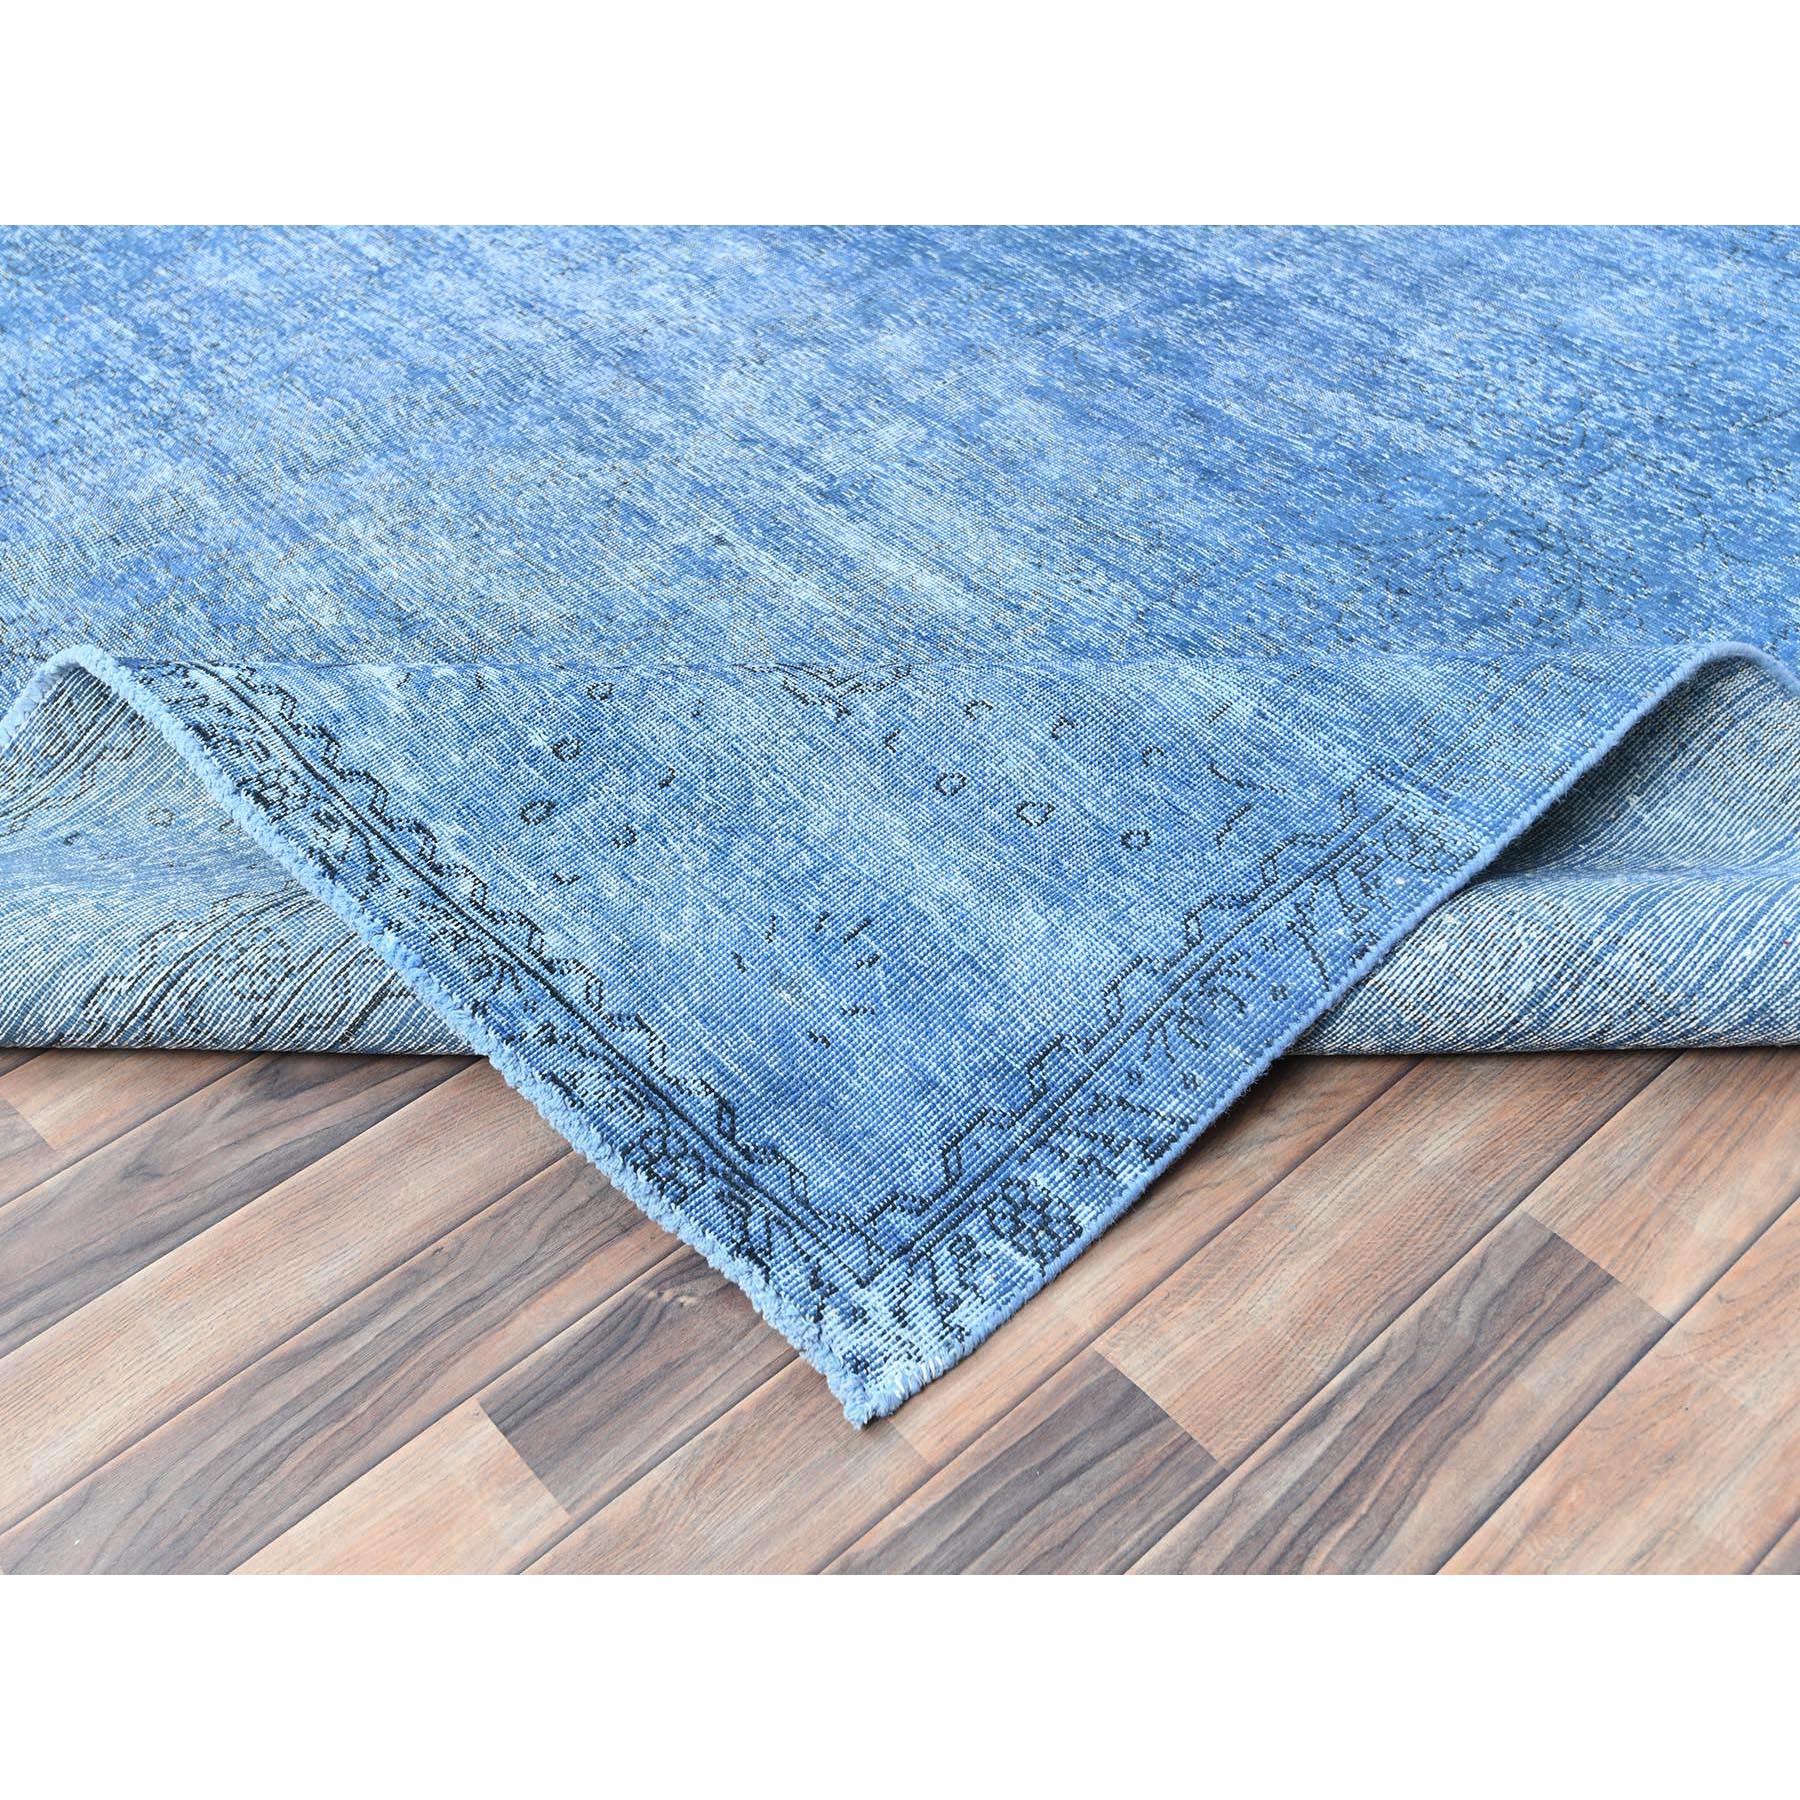 Mid-20th Century Denim Blue Old Persian Tabriz Worn Down Rustic Look Worn Wool Hand Knotted Rug For Sale